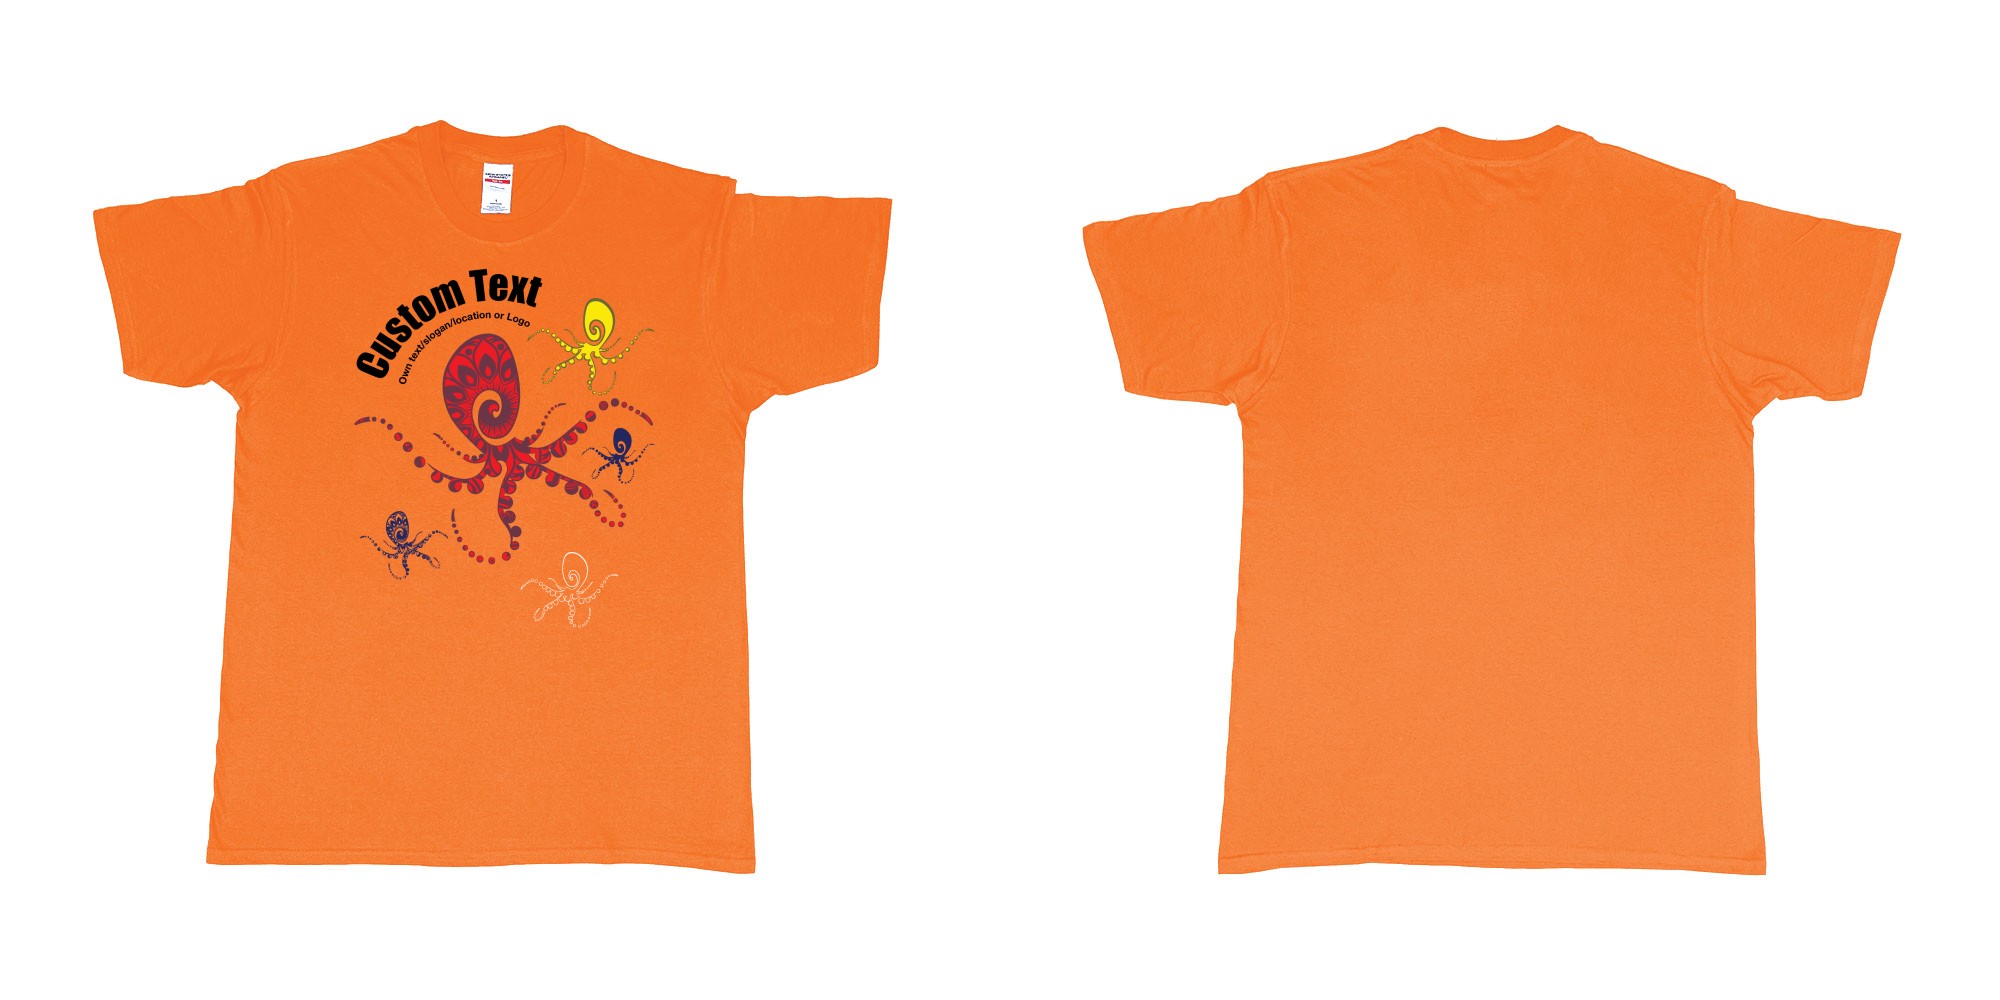 Custom tshirt design octopus bubble mandala tribal in fabric color orange choice your own text made in Bali by The Pirate Way